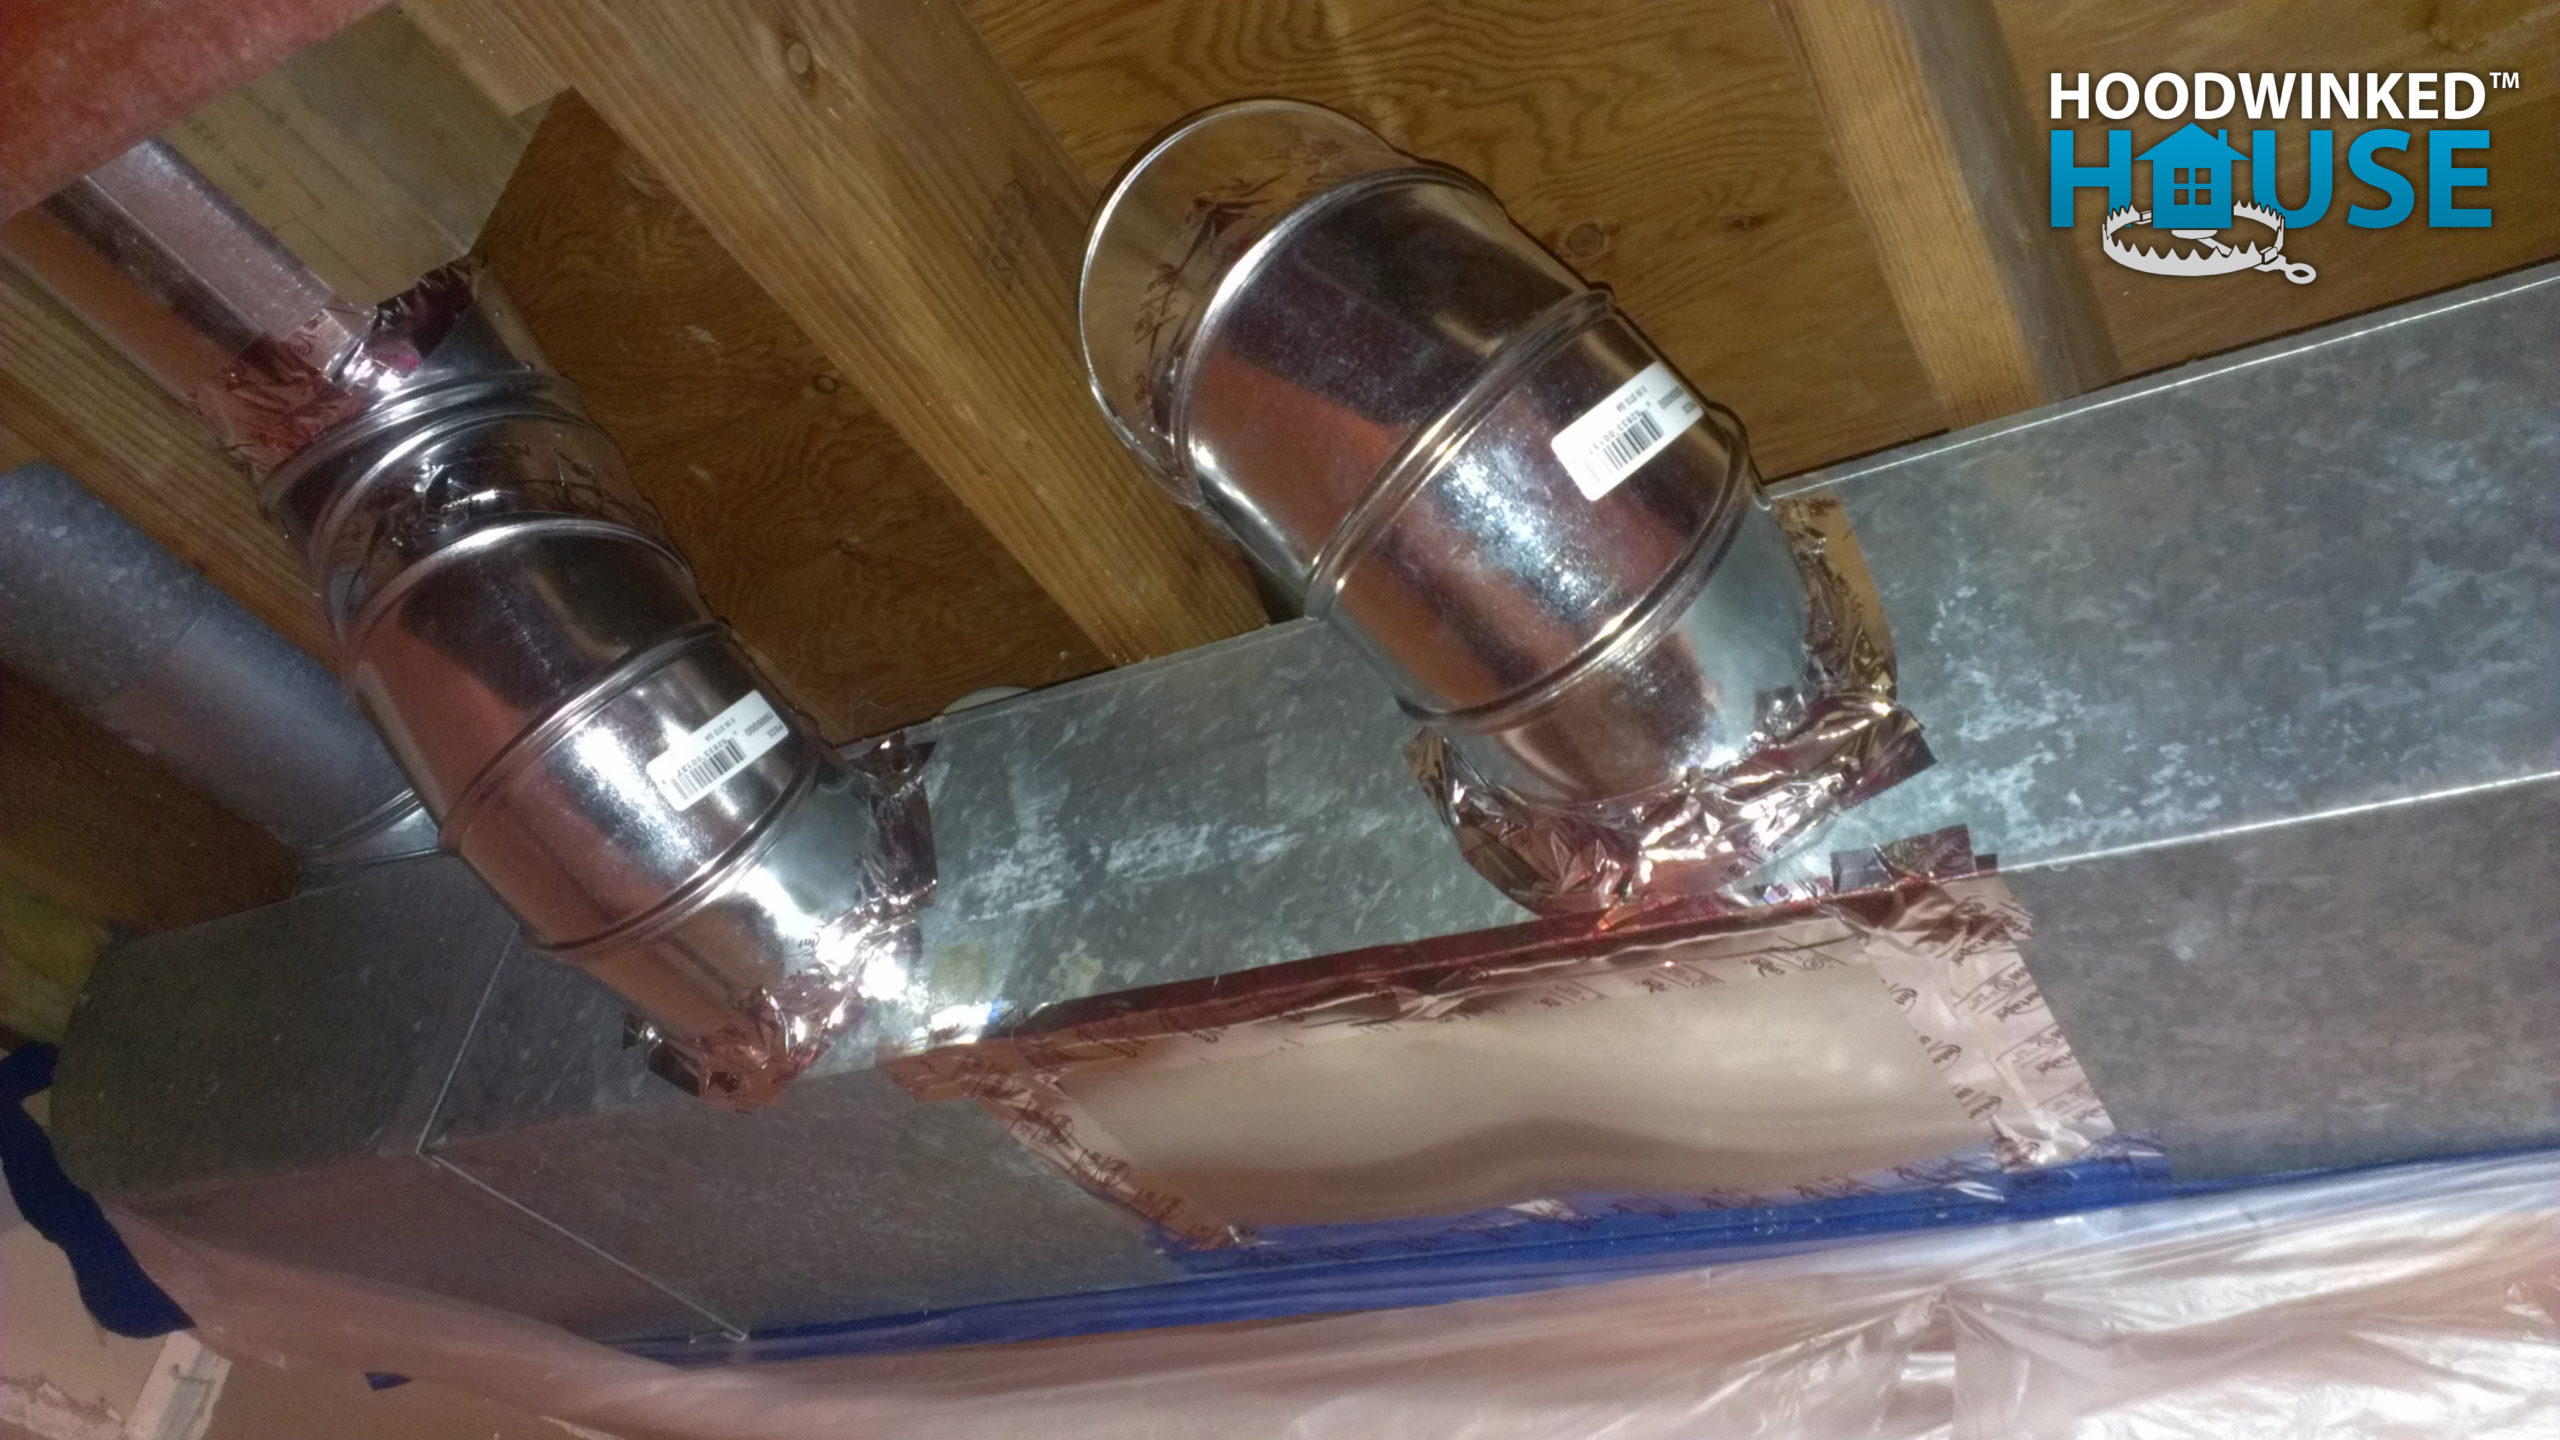 A basement air duct has been repaired with a patch, and two new branches have been added.